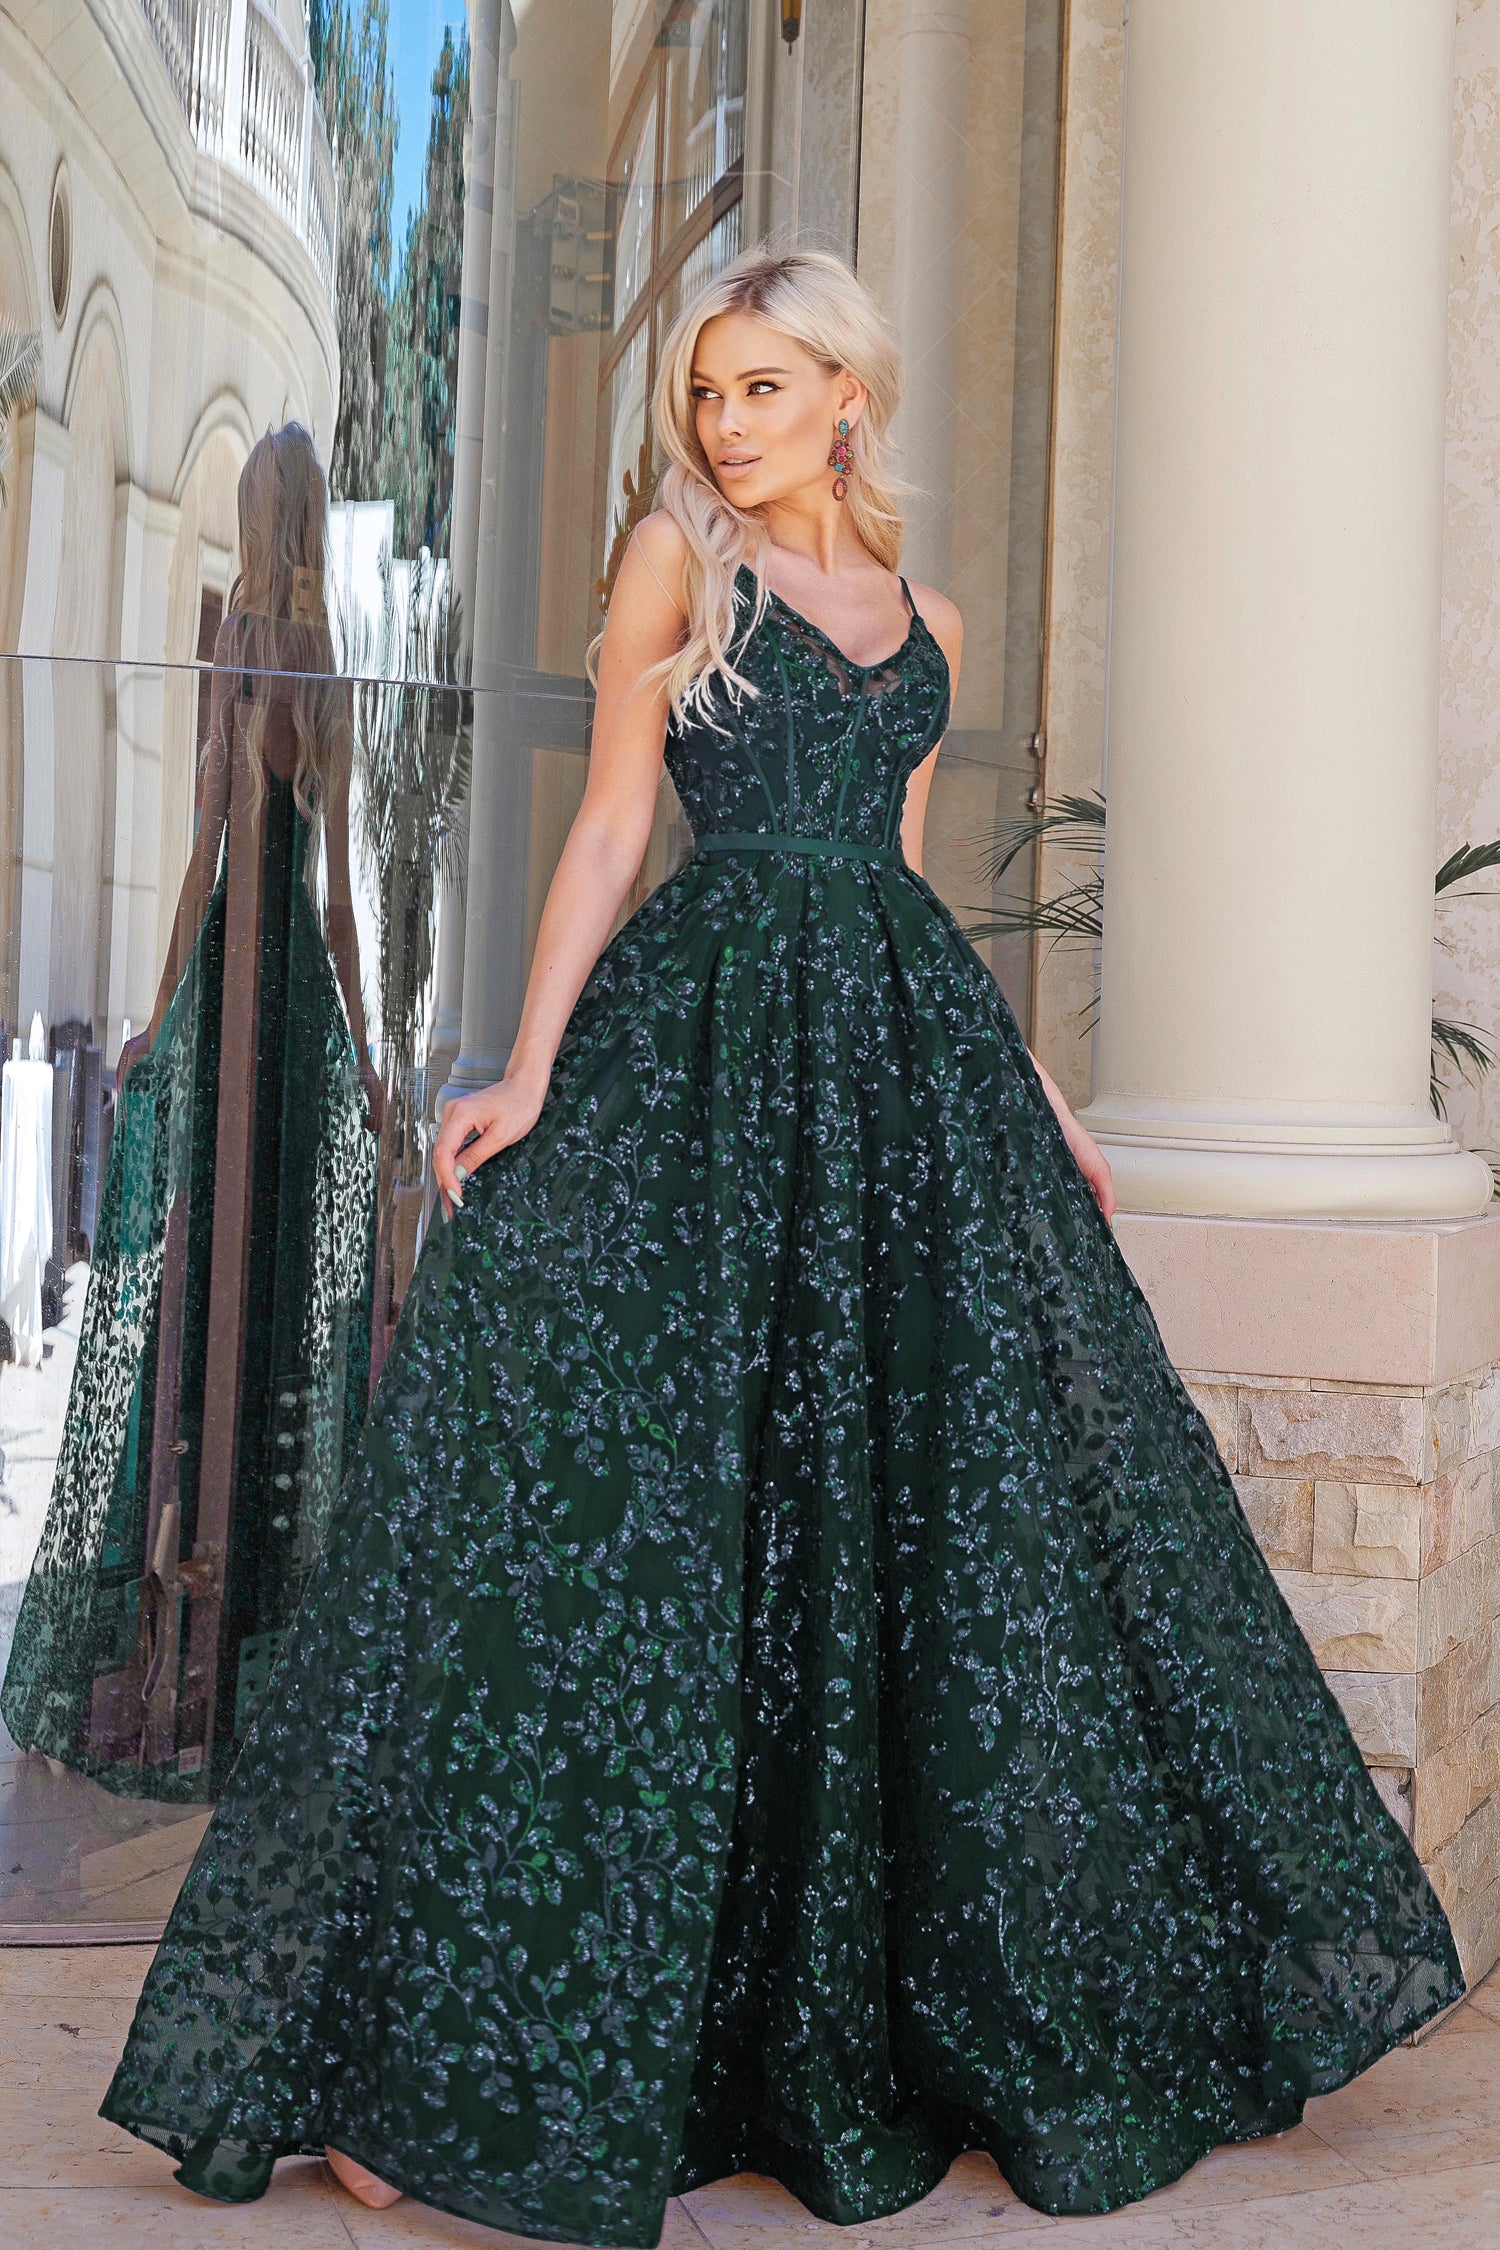 Tina Holly Couture TK069 Emerald Green 3D Sequin A-line Plunging Neckline Formal Dress